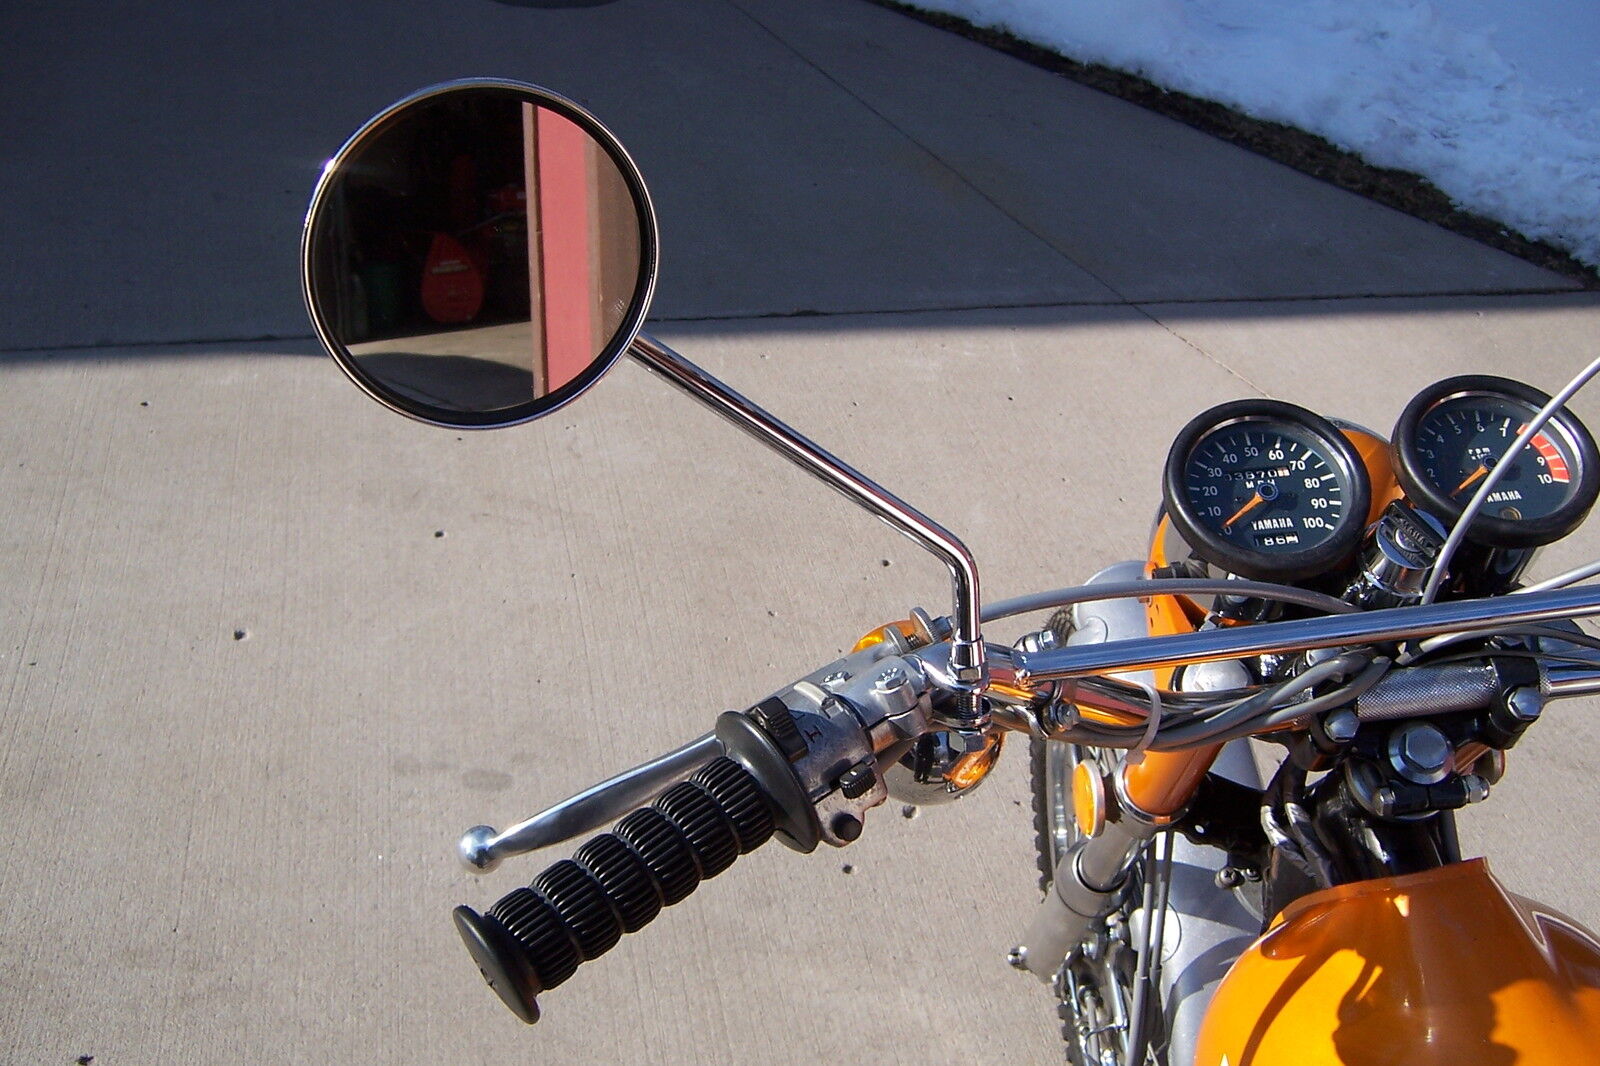 1969 to 1973 Yamaha clamp on mirror DT1 DT2 DT3 RT1 RT2 RT3 CT1 CT2 CT3 AT1 AT2 